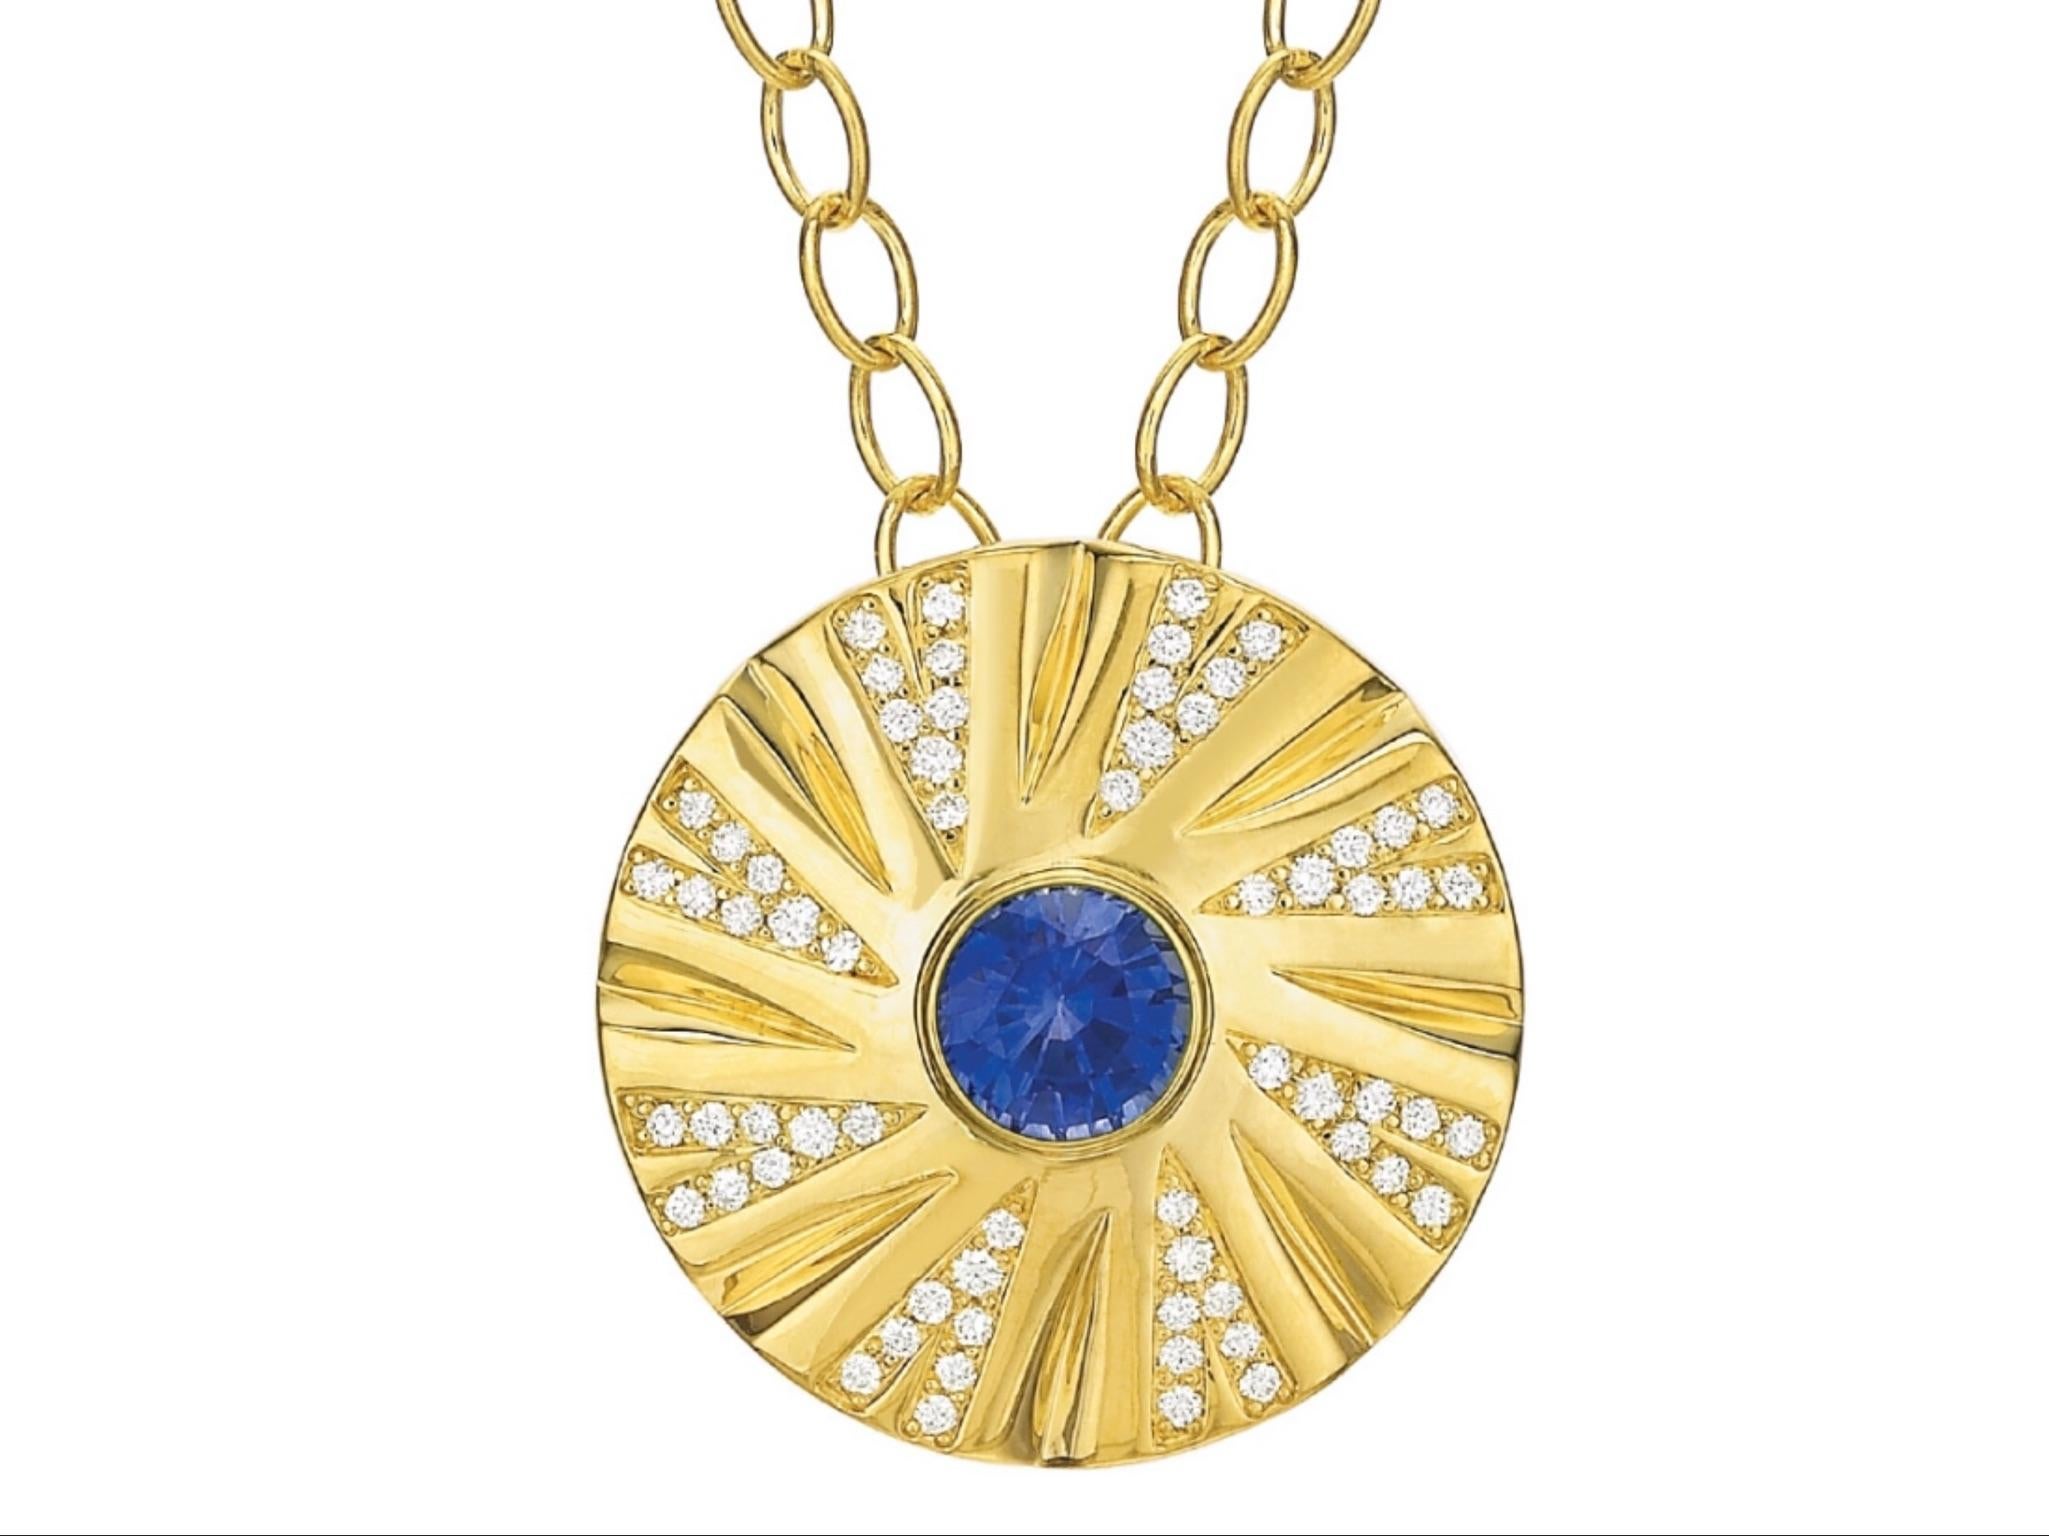 1.07 carat round Sapphire and Diamond Necklace set in Andrew Glassford's Shazam Series Style. Diamonds in a V shape radiate from the Sapphire center stone and are .35 ctw of GH VSI round brilliants. The chain is 18k Yellow Gold link, 3mm wide and 18